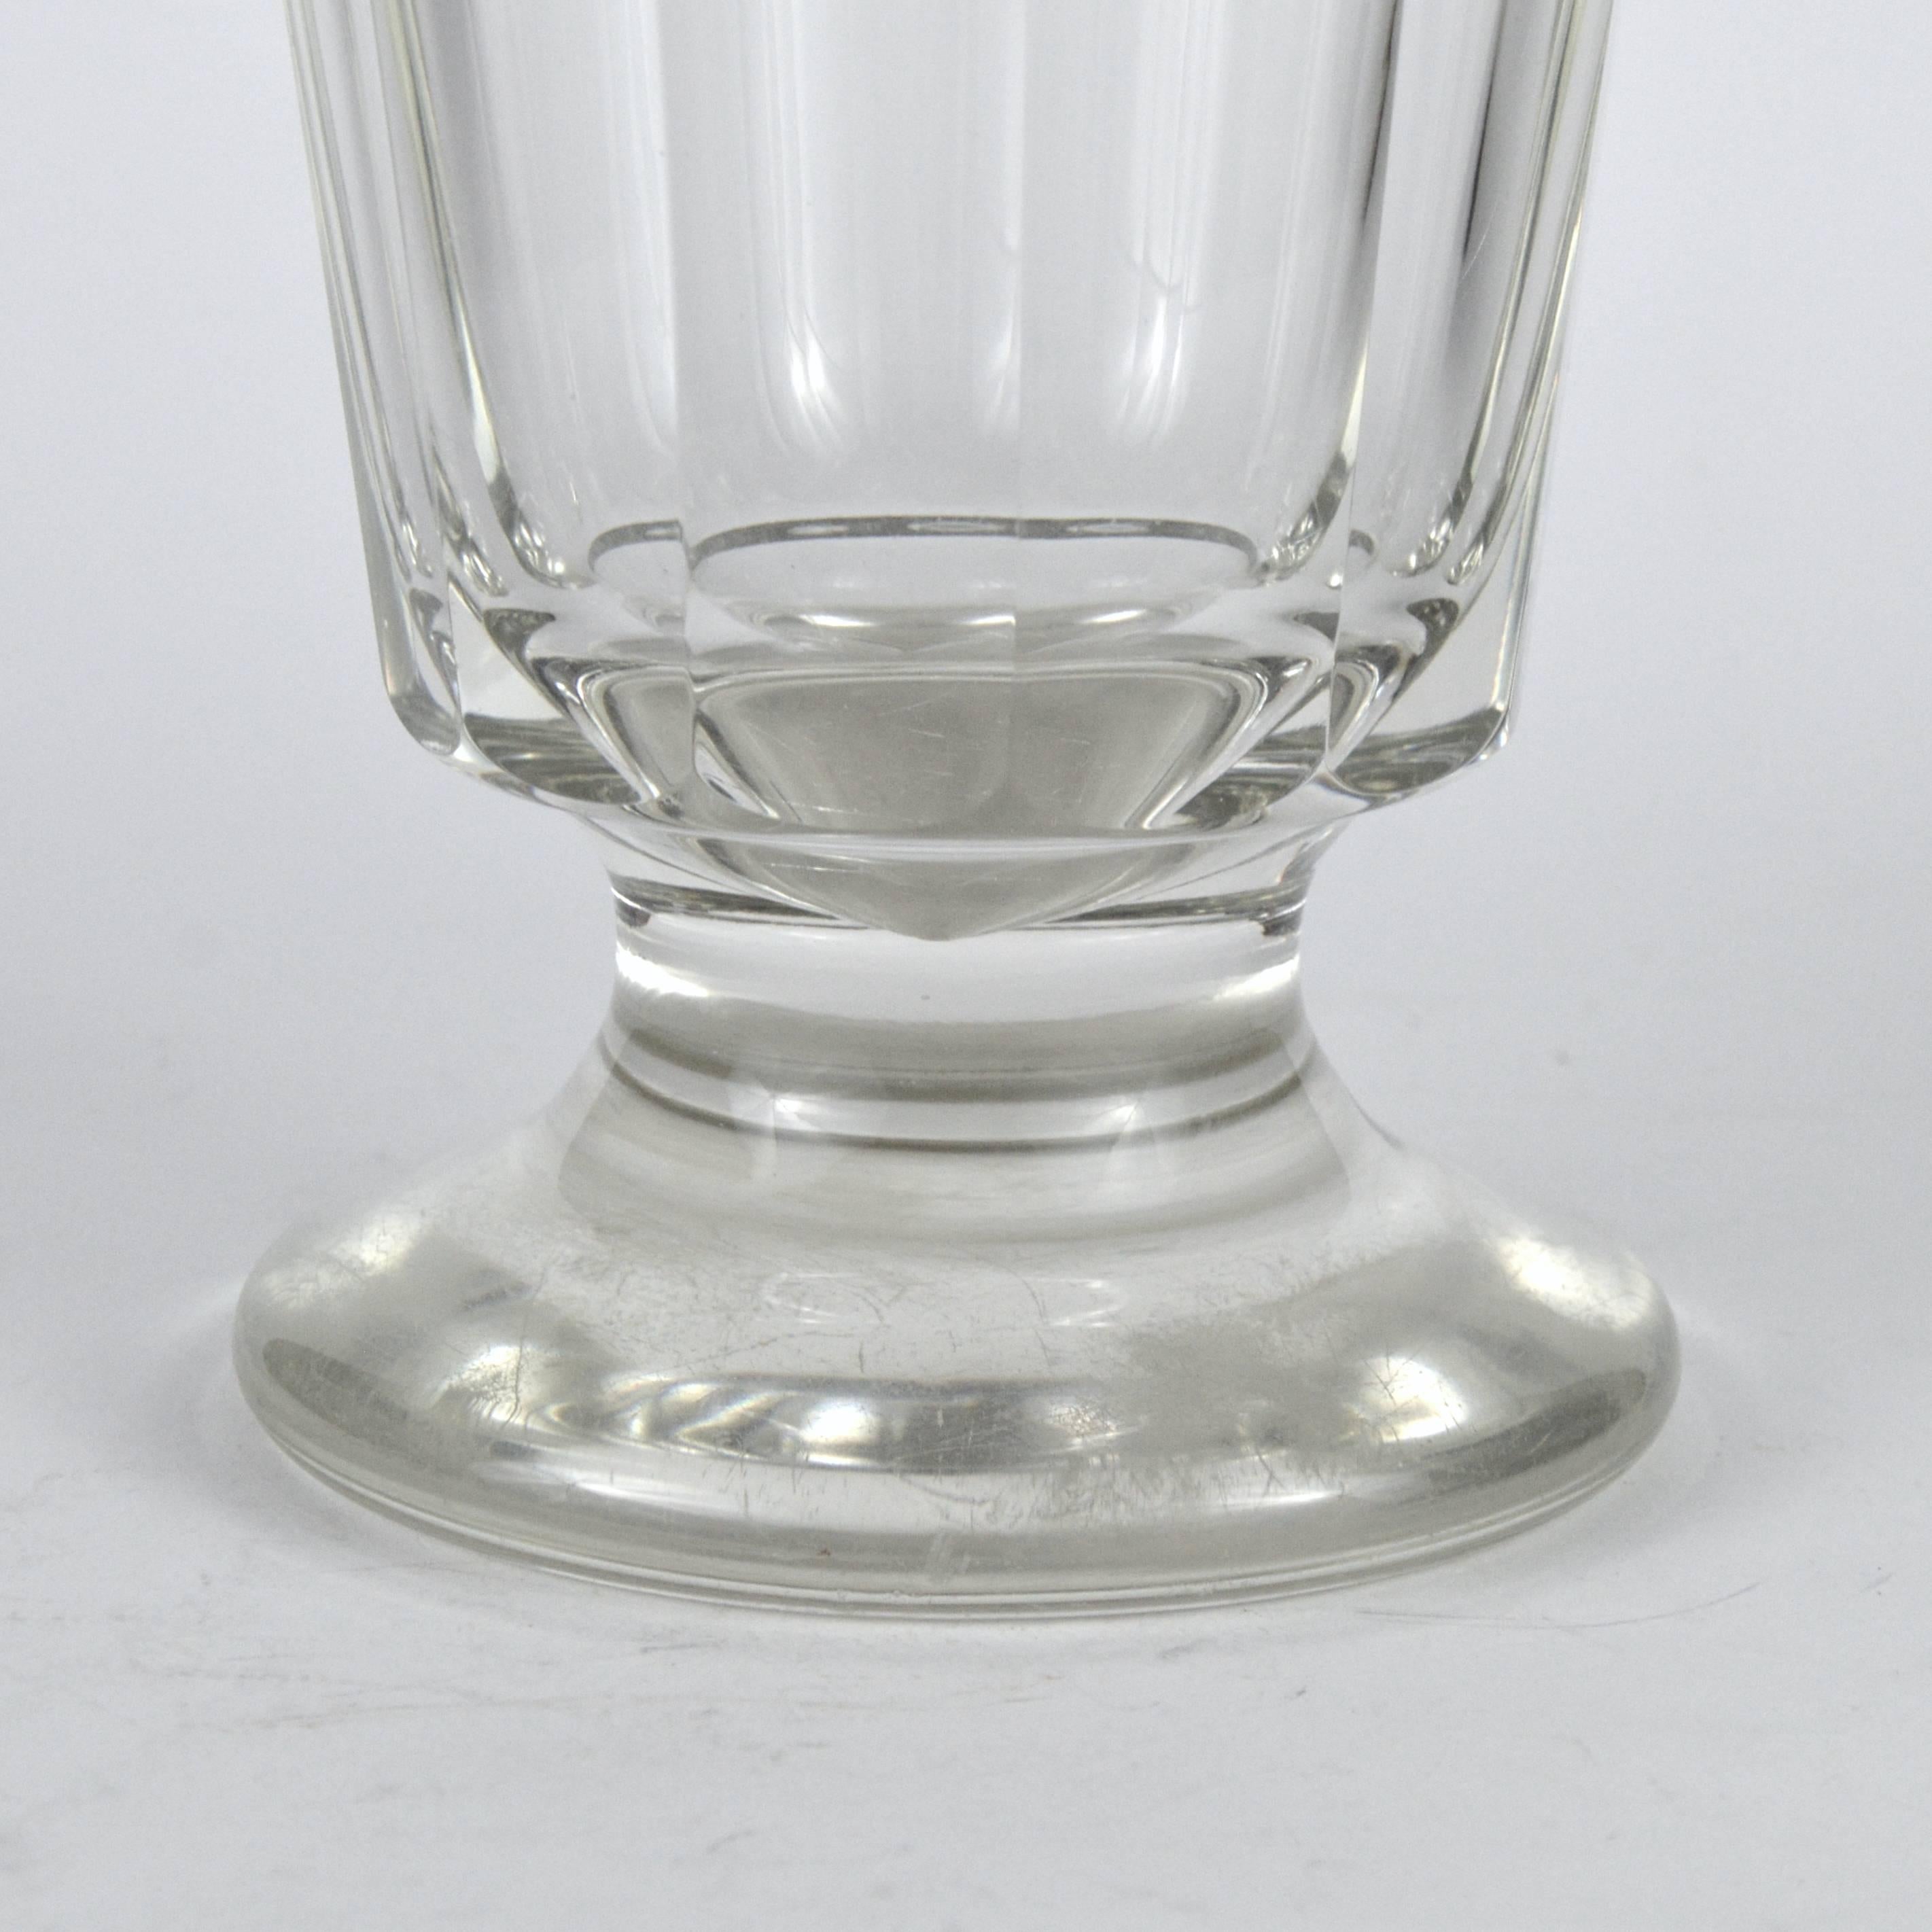 Art Deco silver mounted Val Saint Lambert white crystal vase by Wolfers Brothers.
Belgium, 1940-1960s. Silver standard 835/1000.